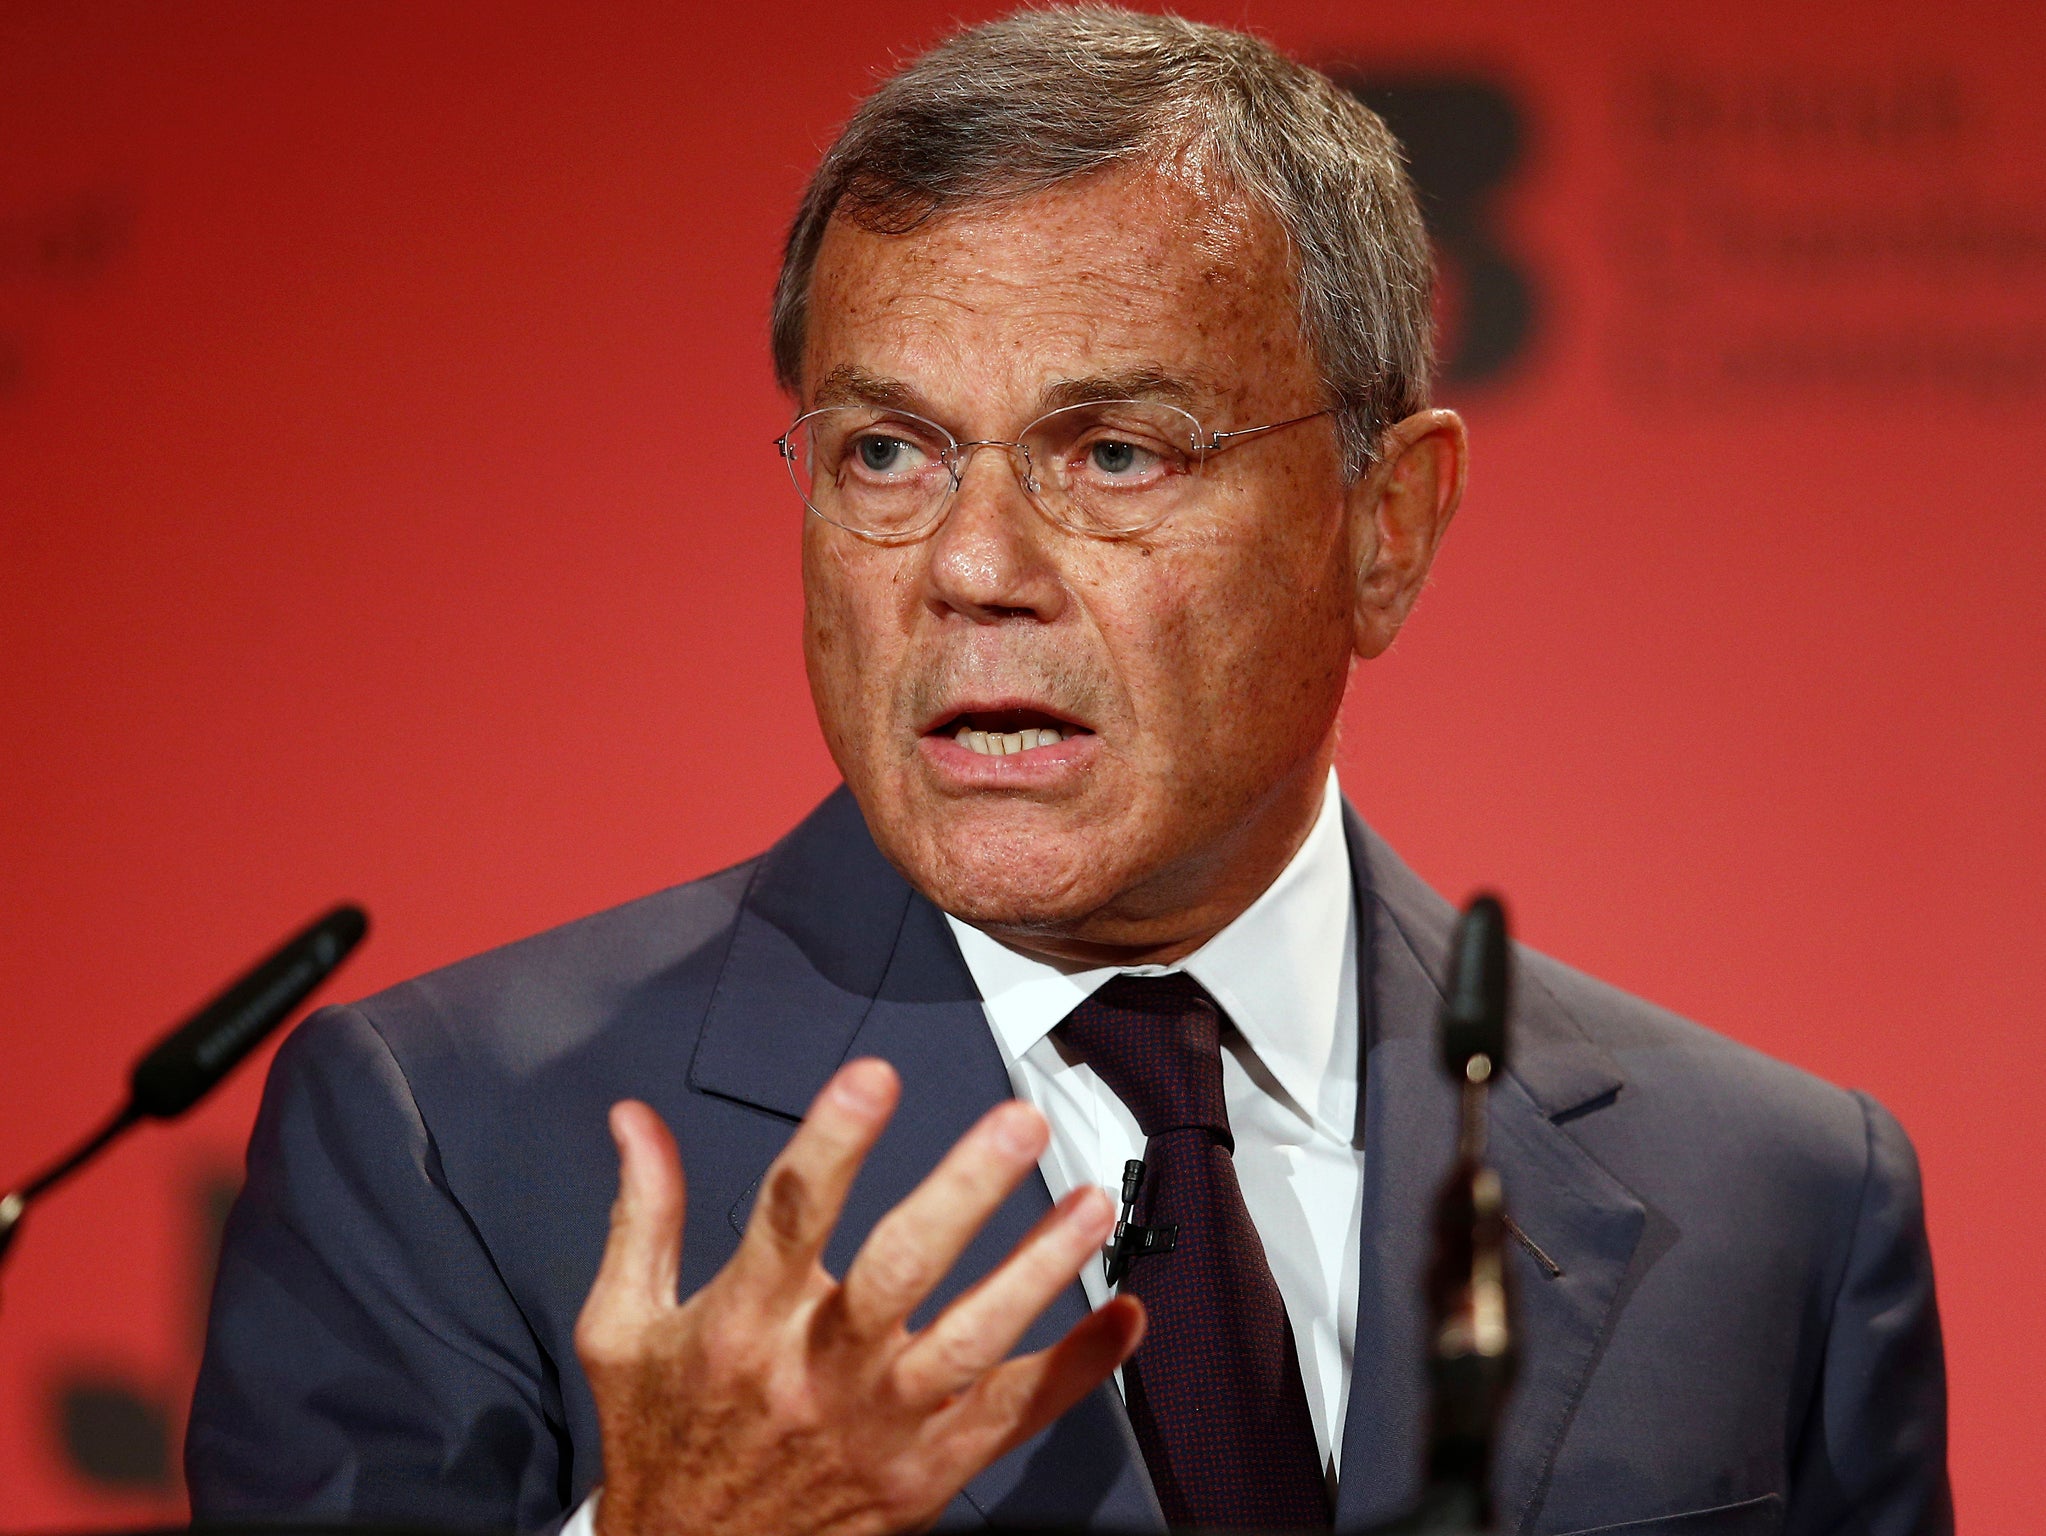 WPP founder and CEO Martin Sorrell, speaks at the British chambers of Commerce annual conference